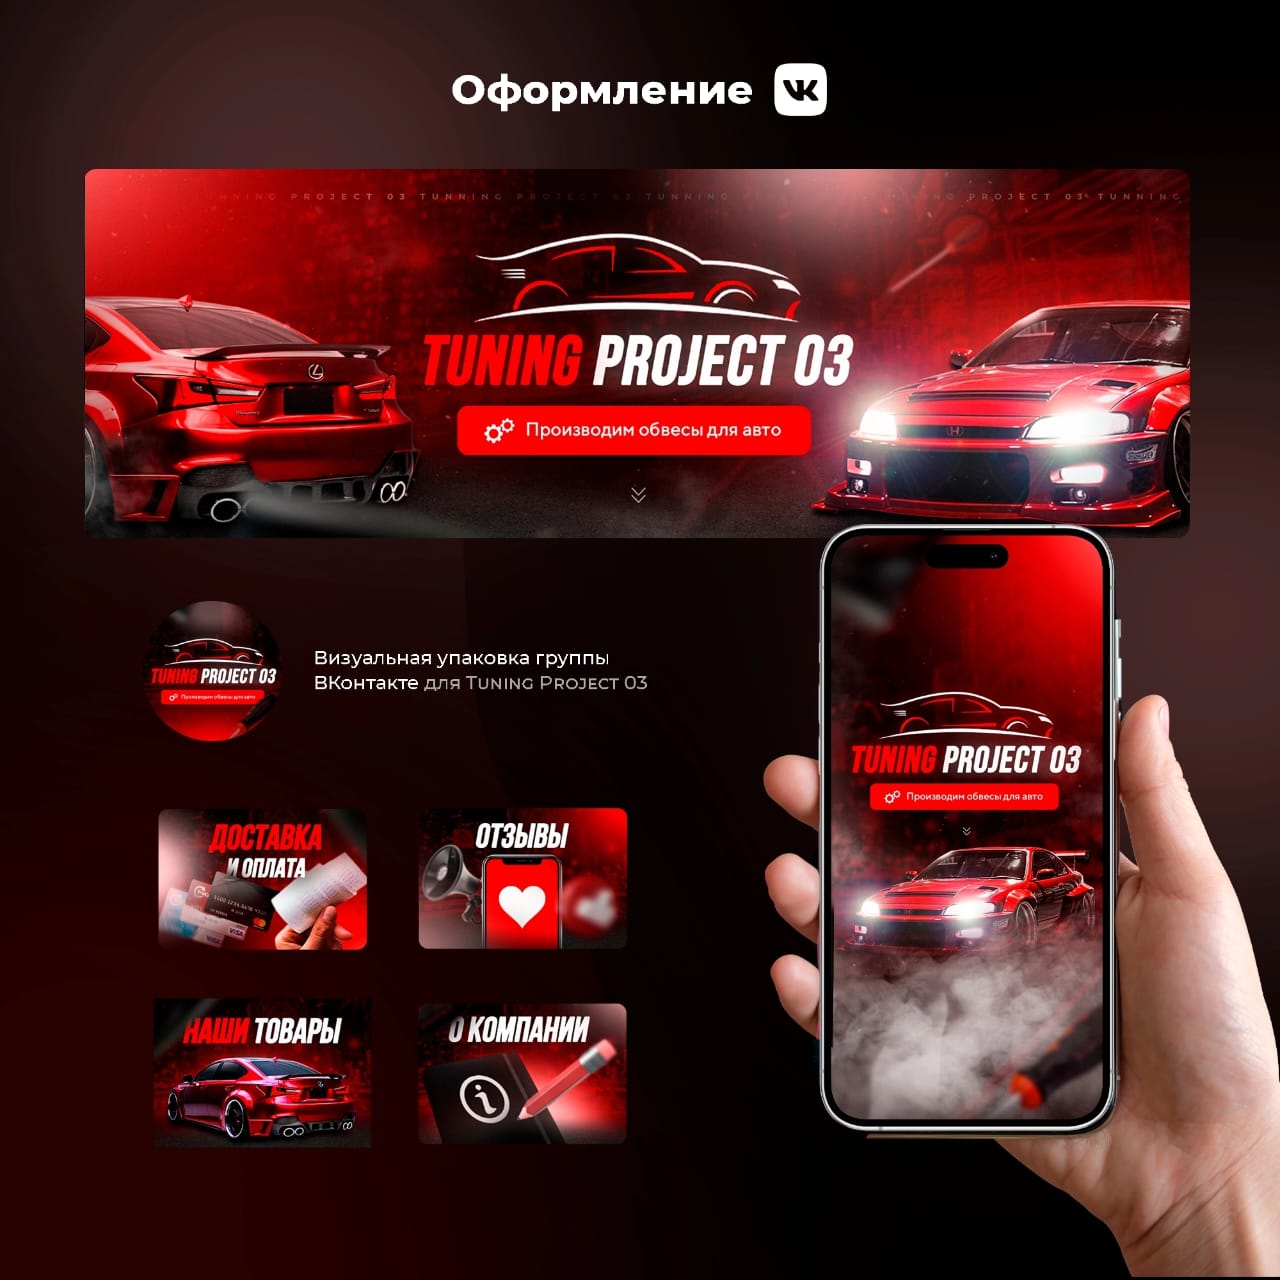 Oformlenie vk Tuning Project